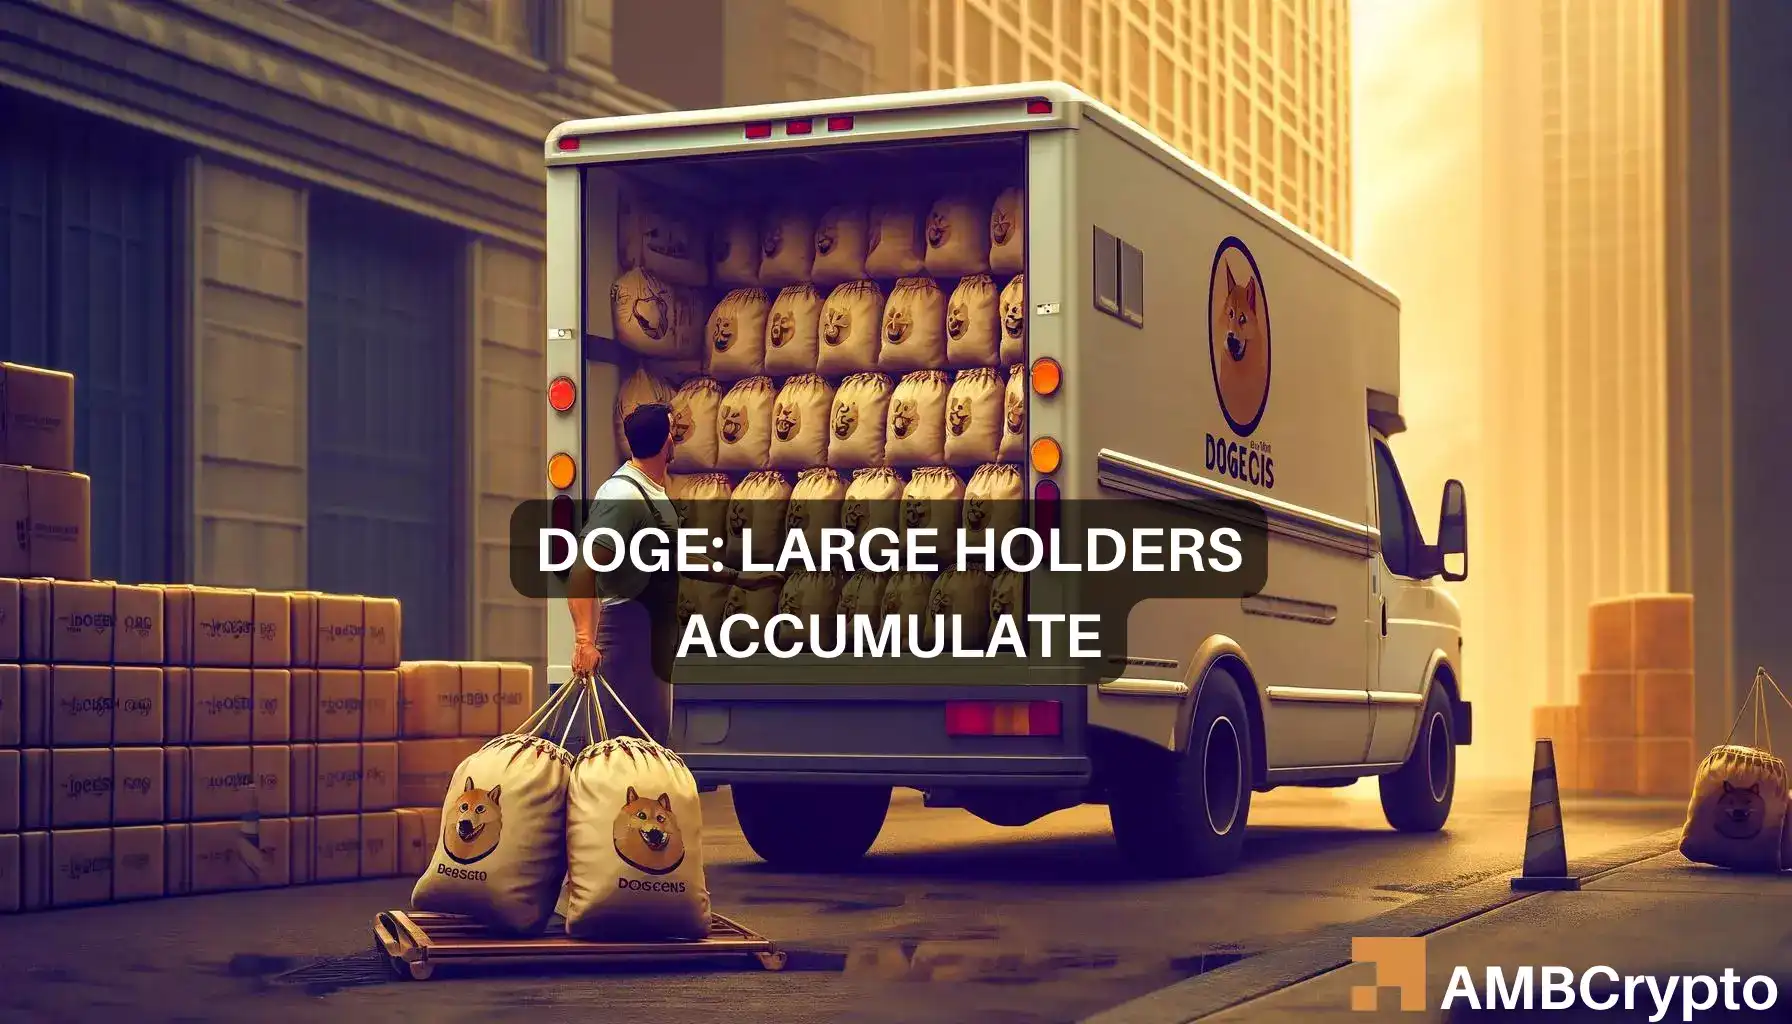  265.86M reasons to buy DOGE?